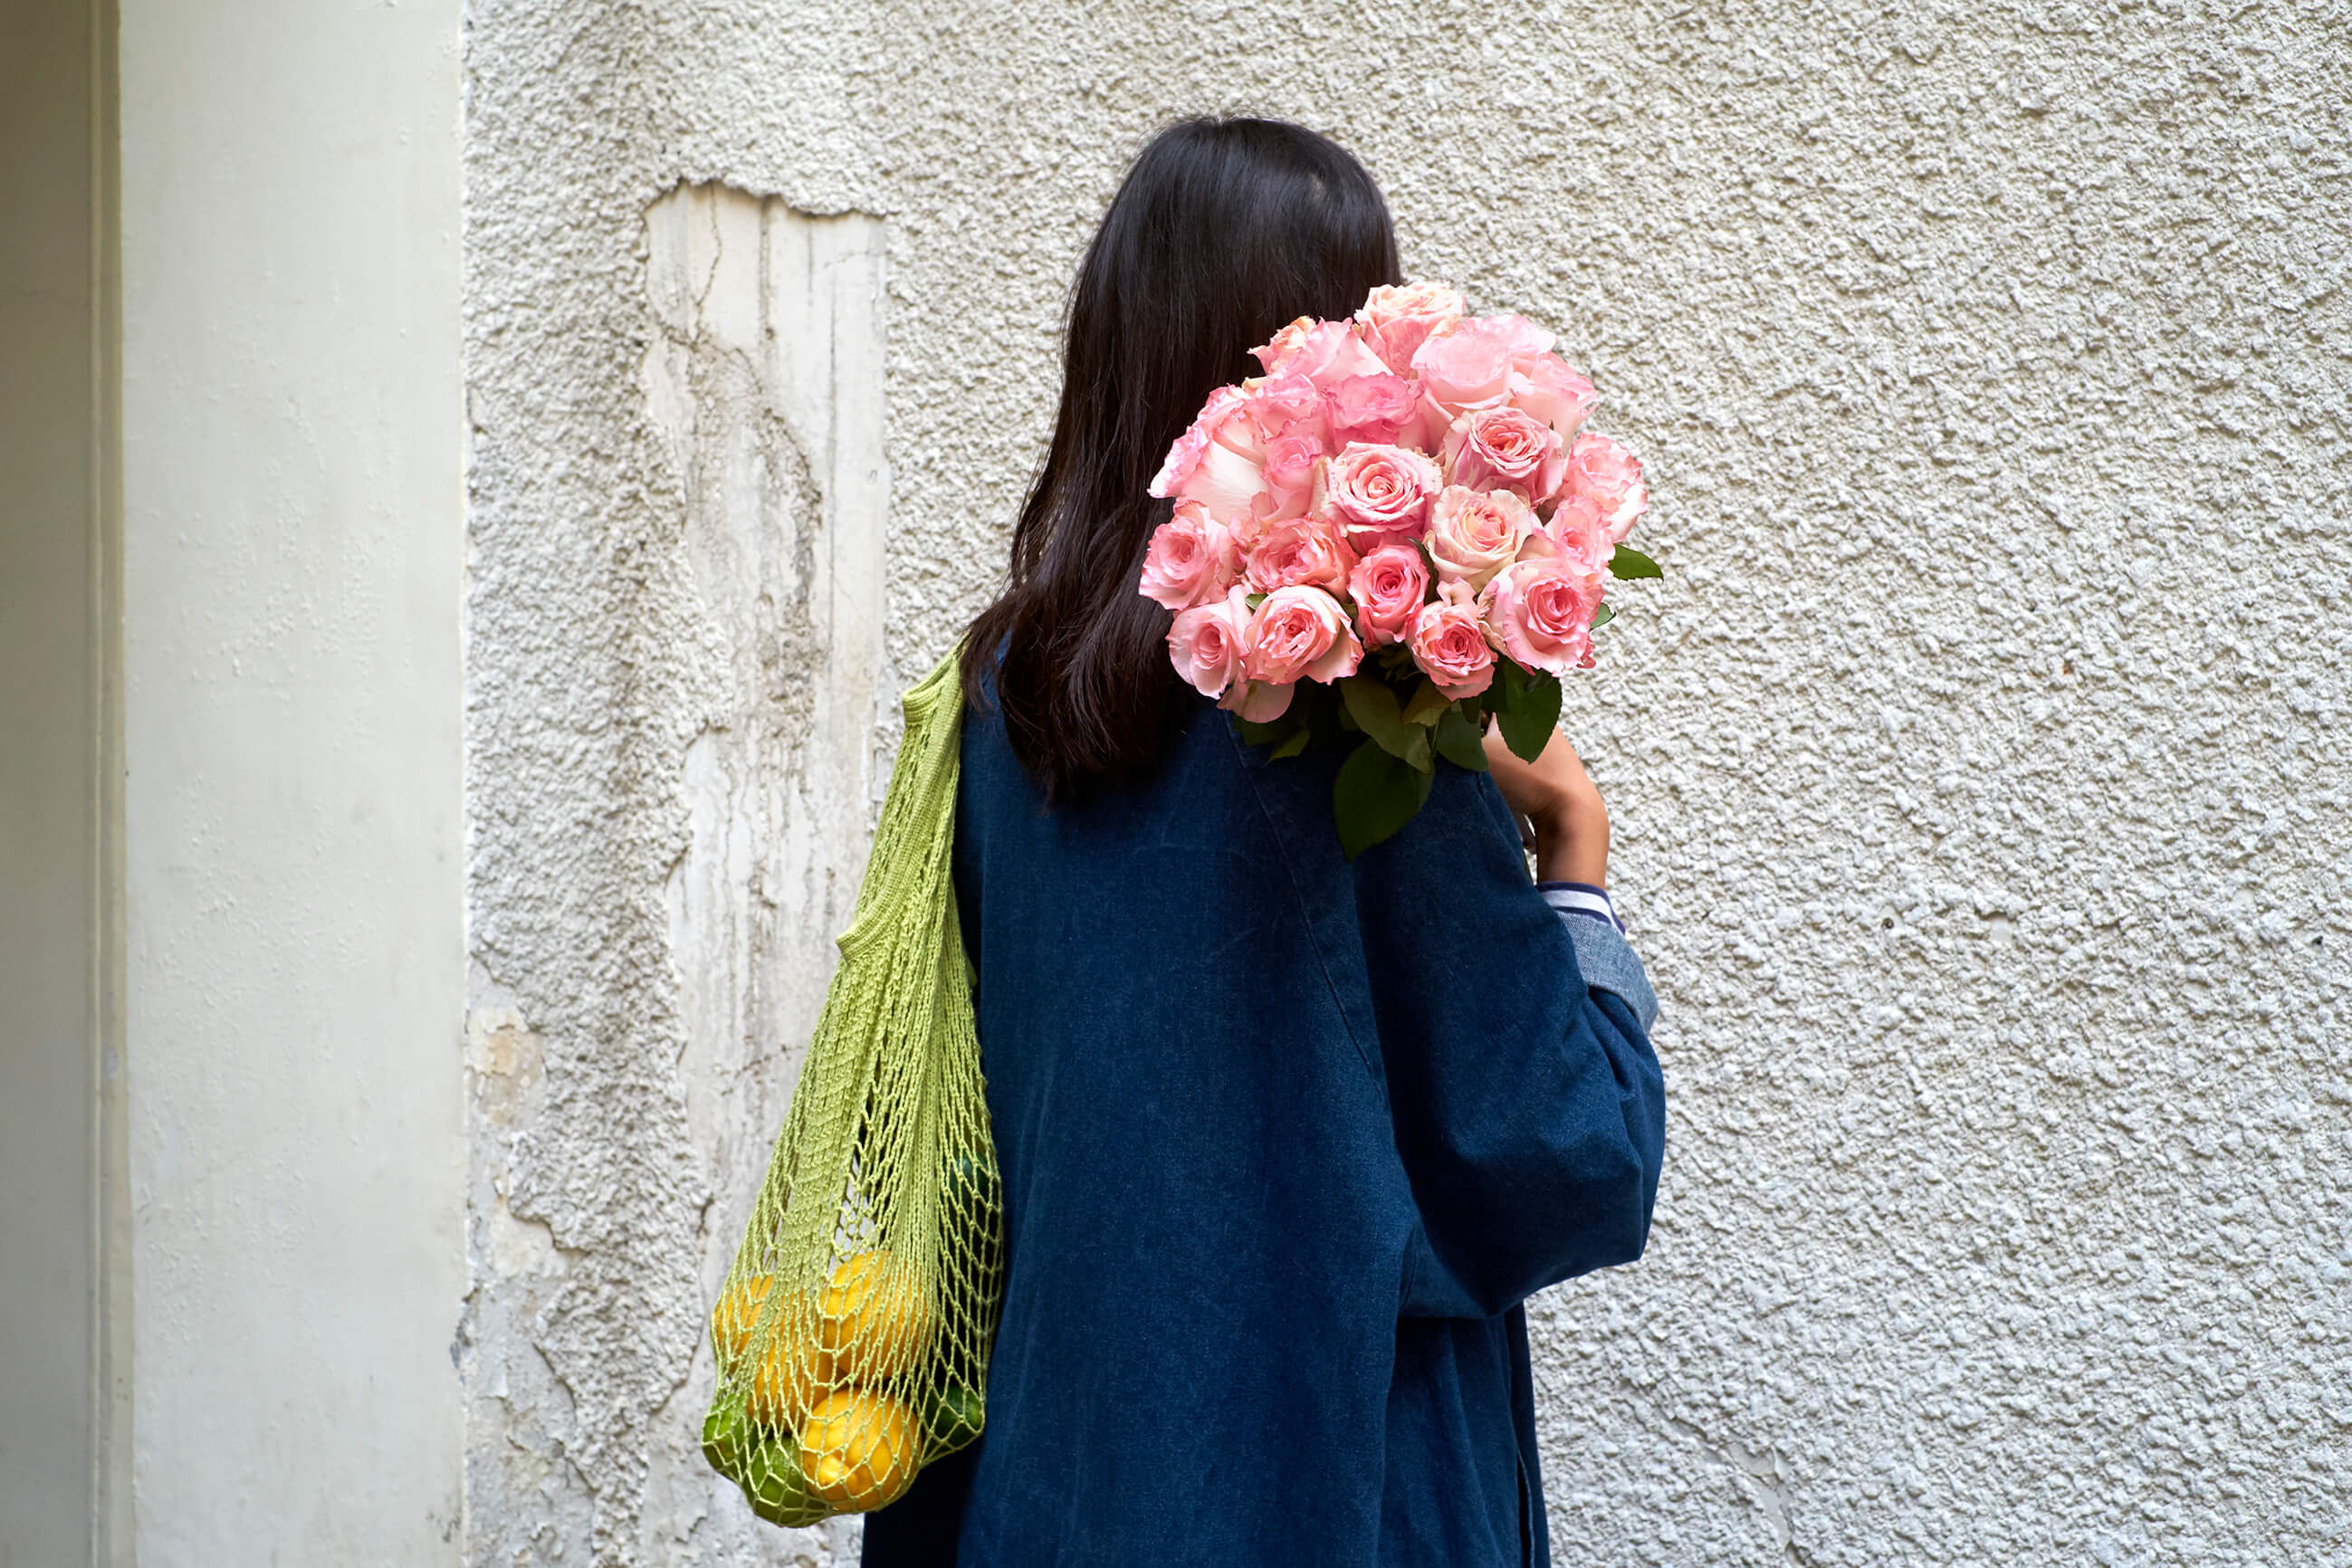 15 Options for Flower Delivery in NYC